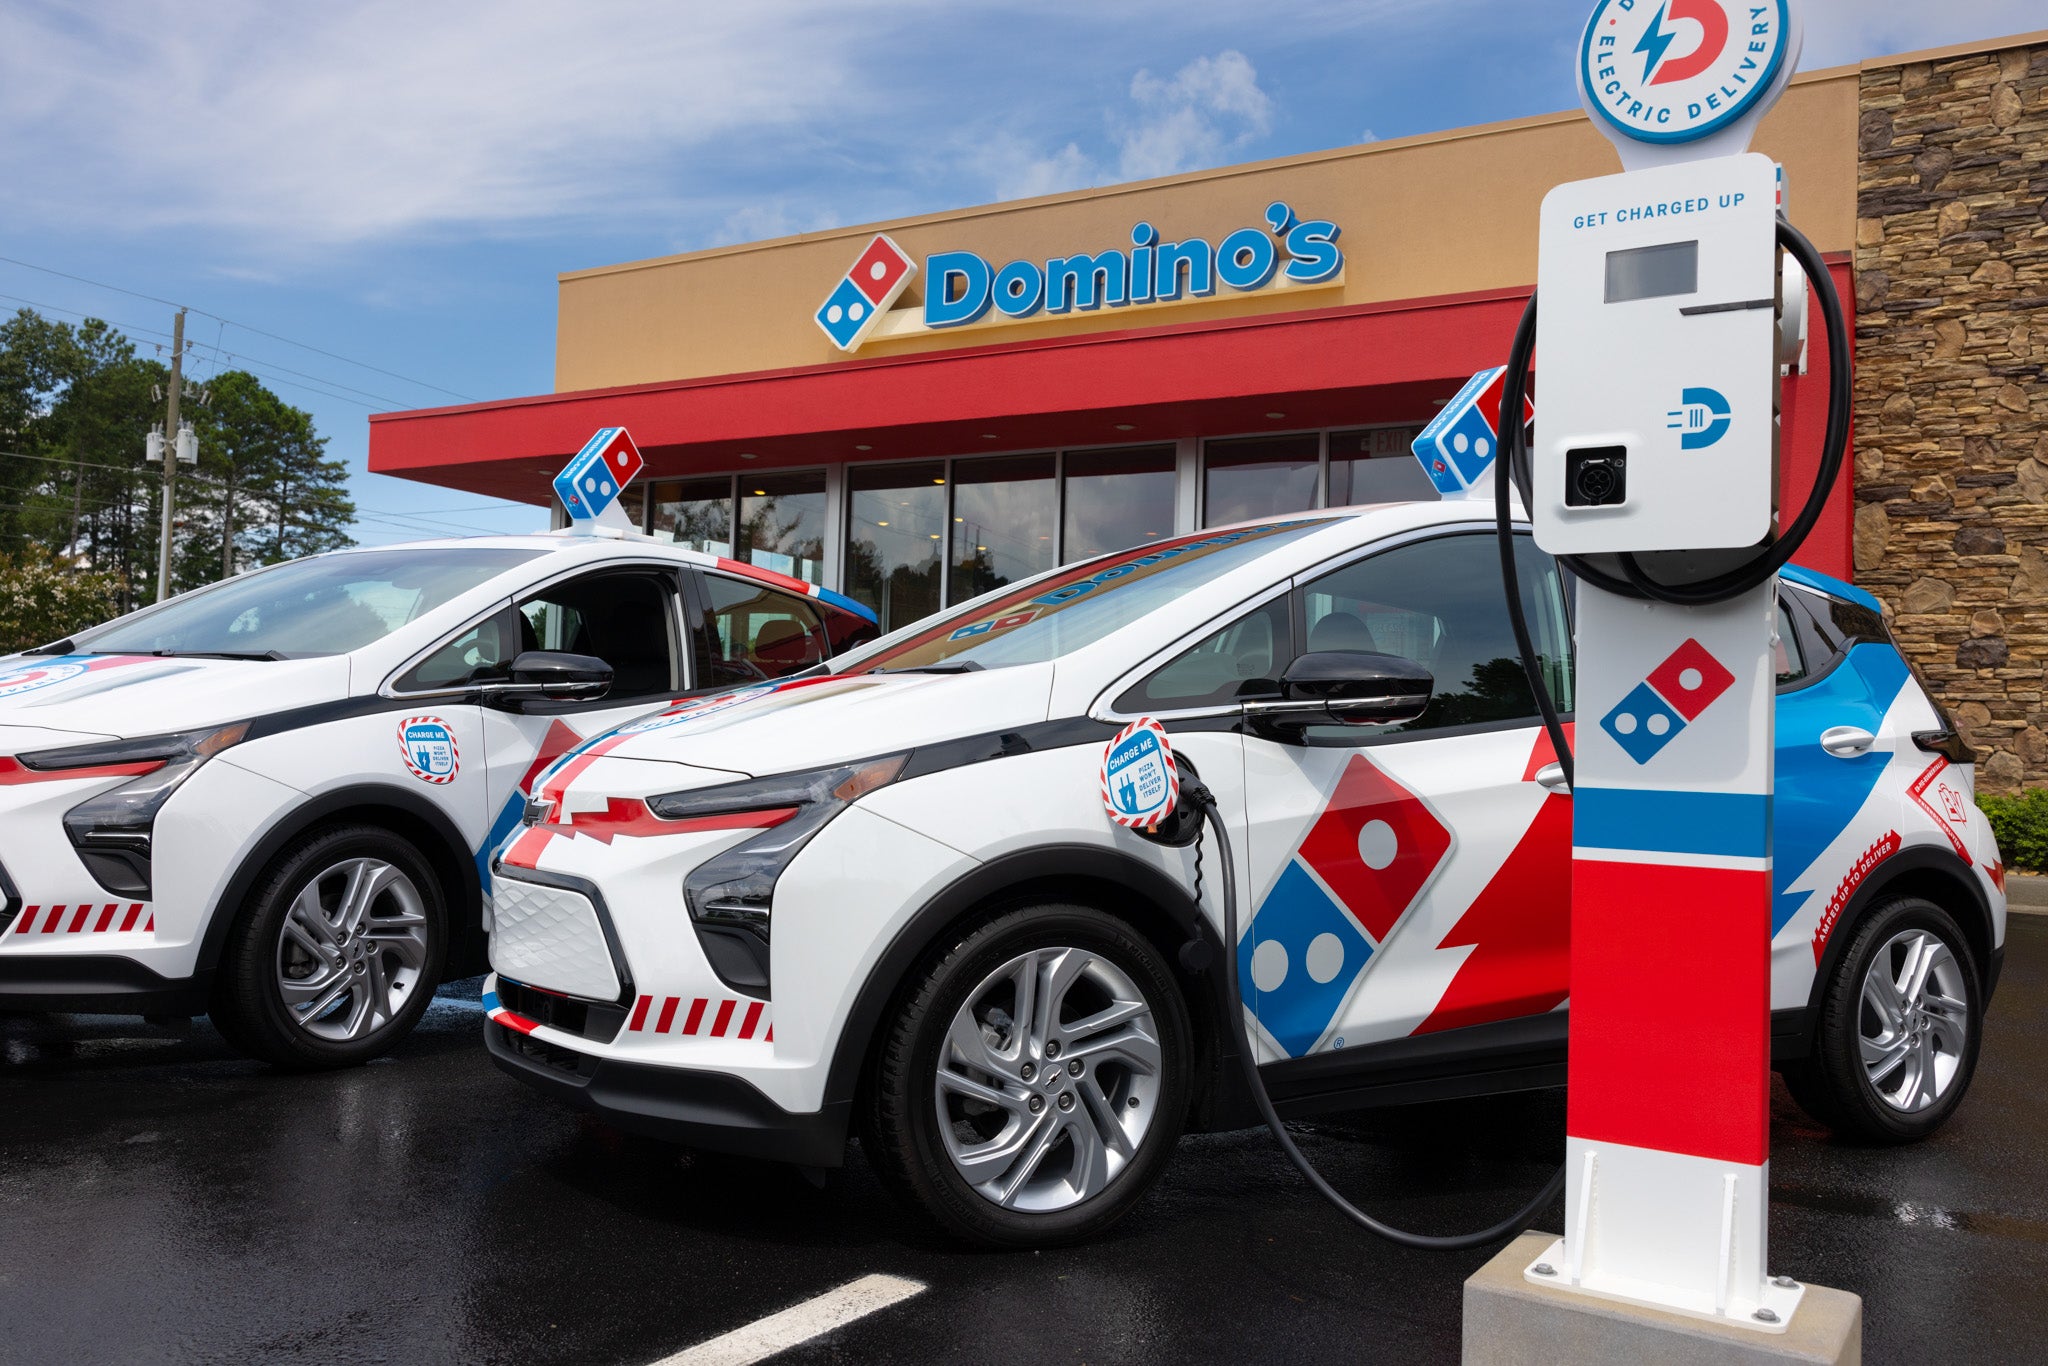 U.S. Domino’s Buys 800 Chevy Bolt EVs for Pizza Delivery Fleet